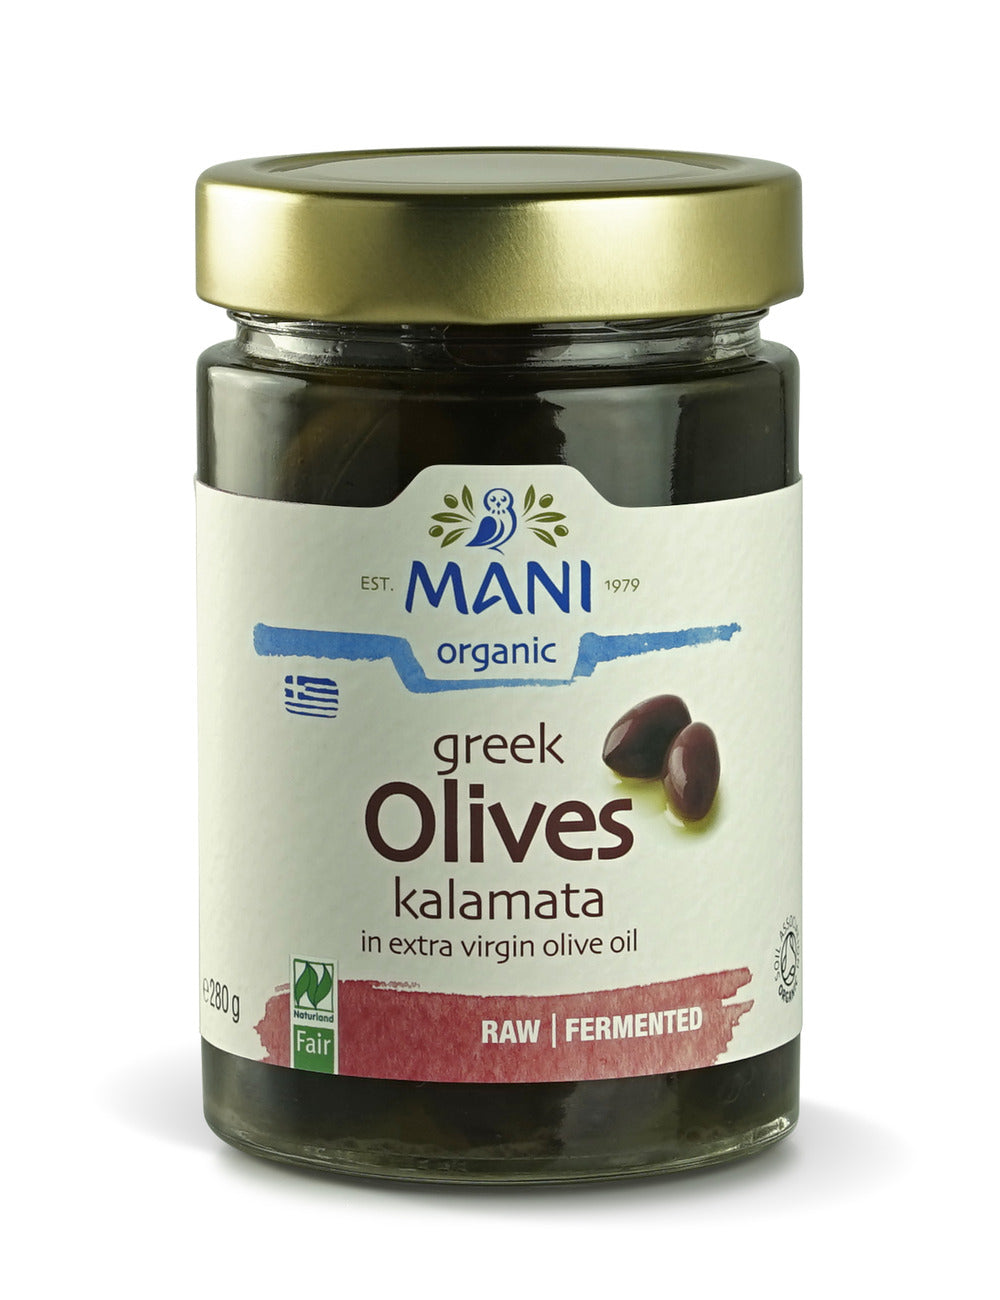 Organic Raw & Fermented Kalamata Olives in Extra Virgin Olive Oil 280g